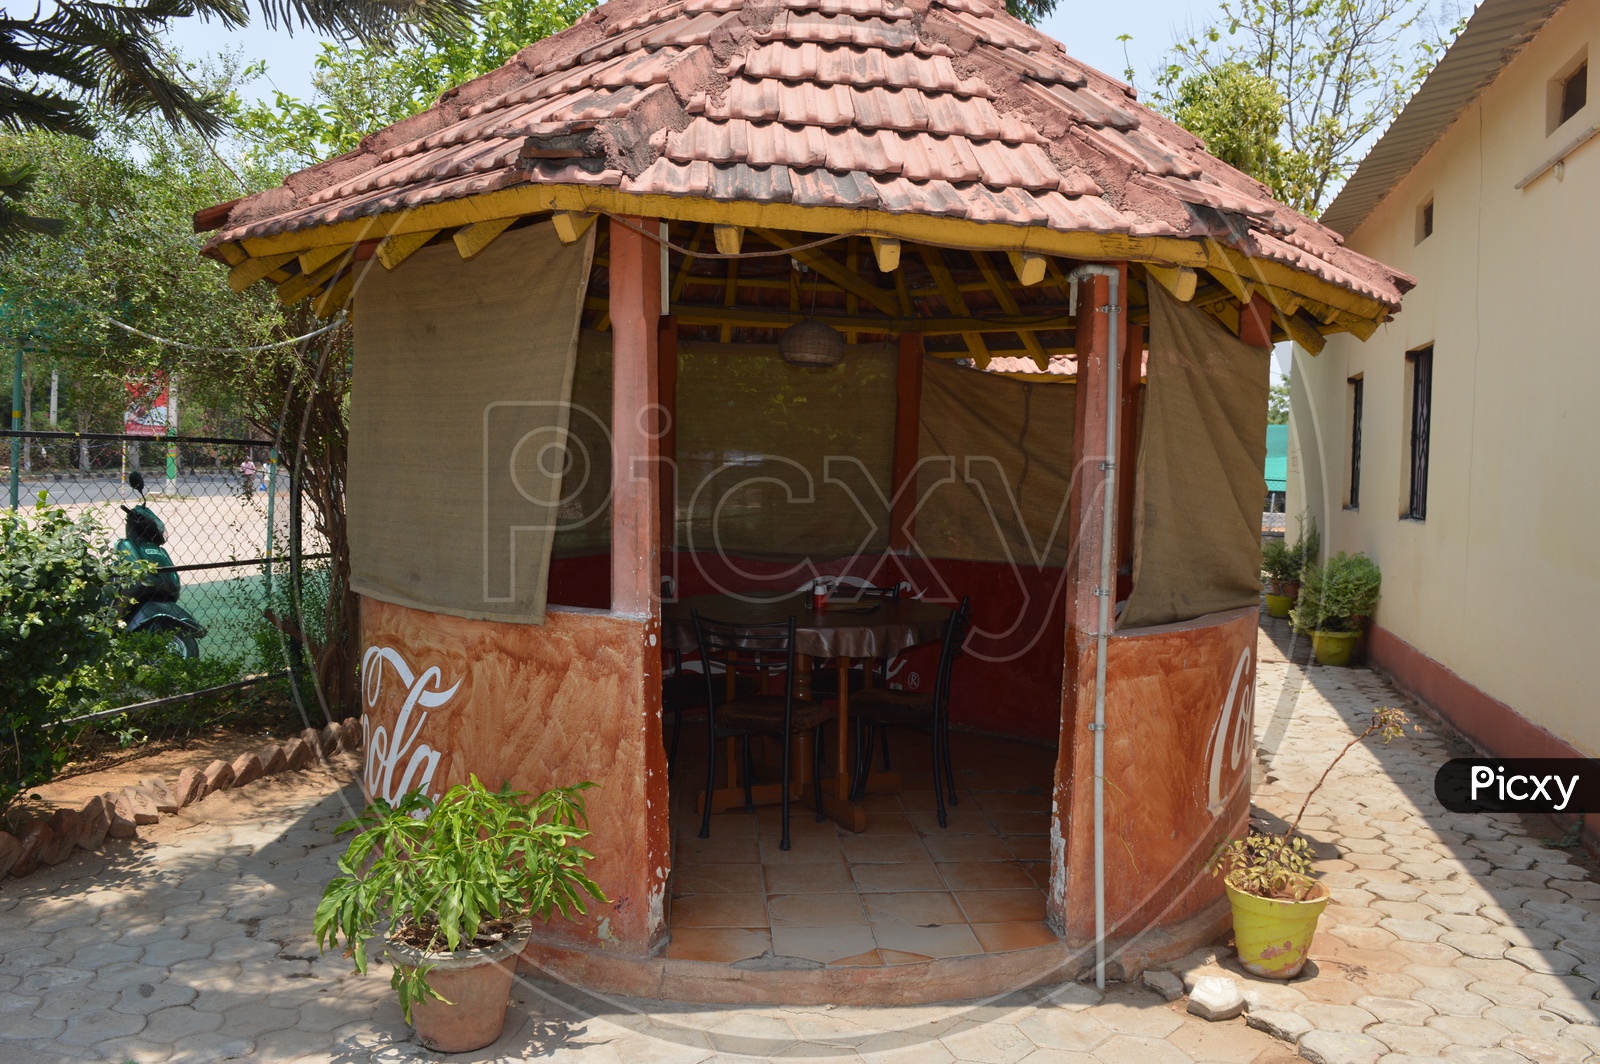 Village Theme Dhaba With Huts